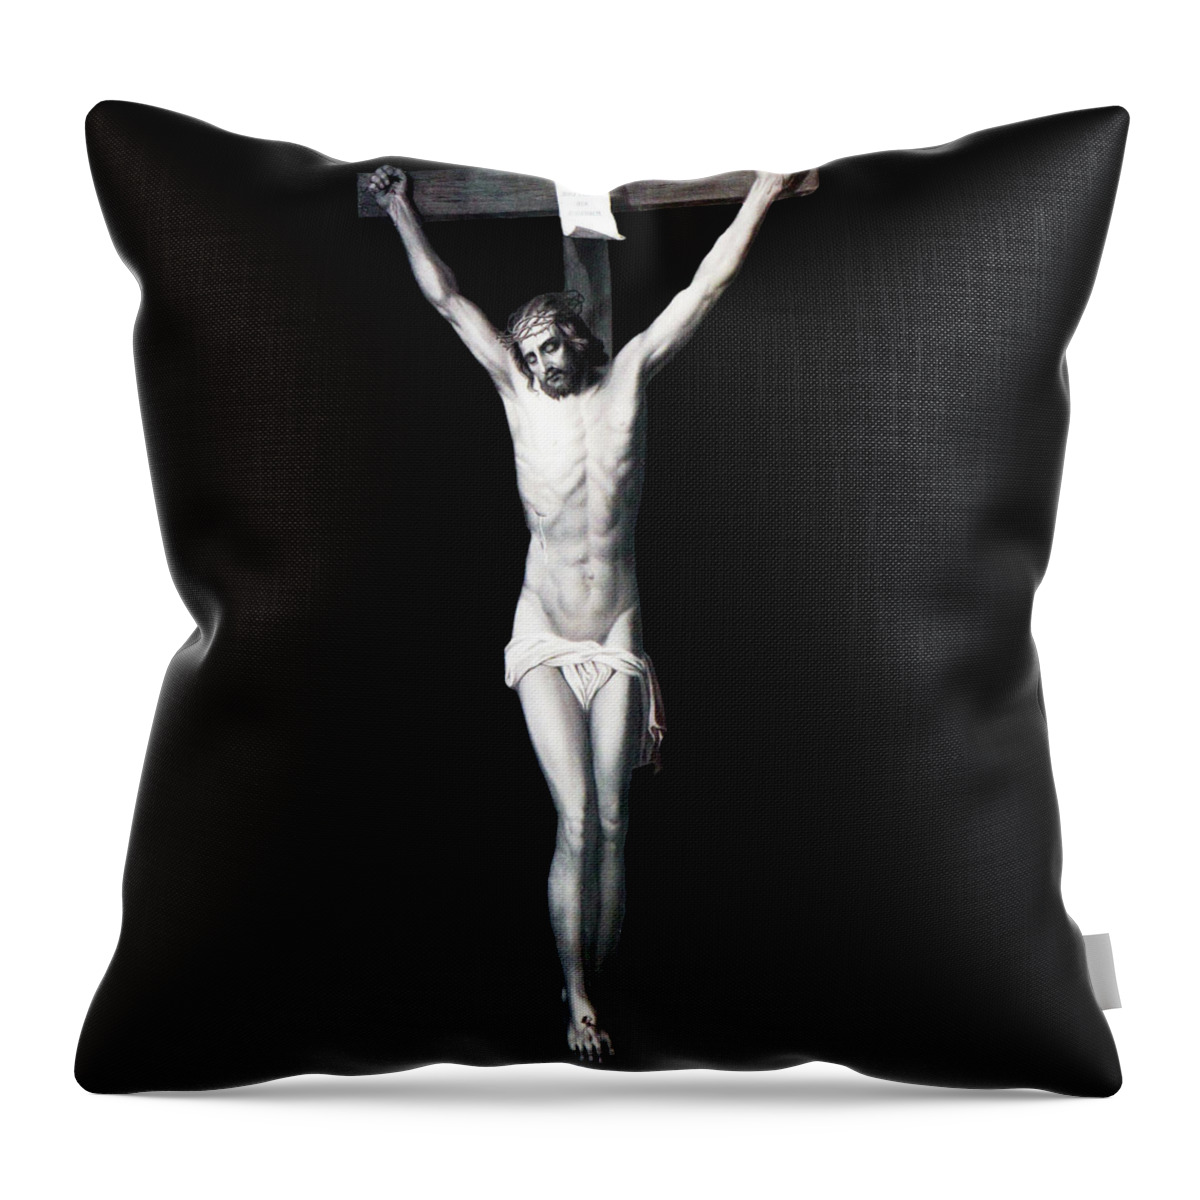 Jesus Throw Pillow featuring the photograph The Crucifixion by Munir Alawi